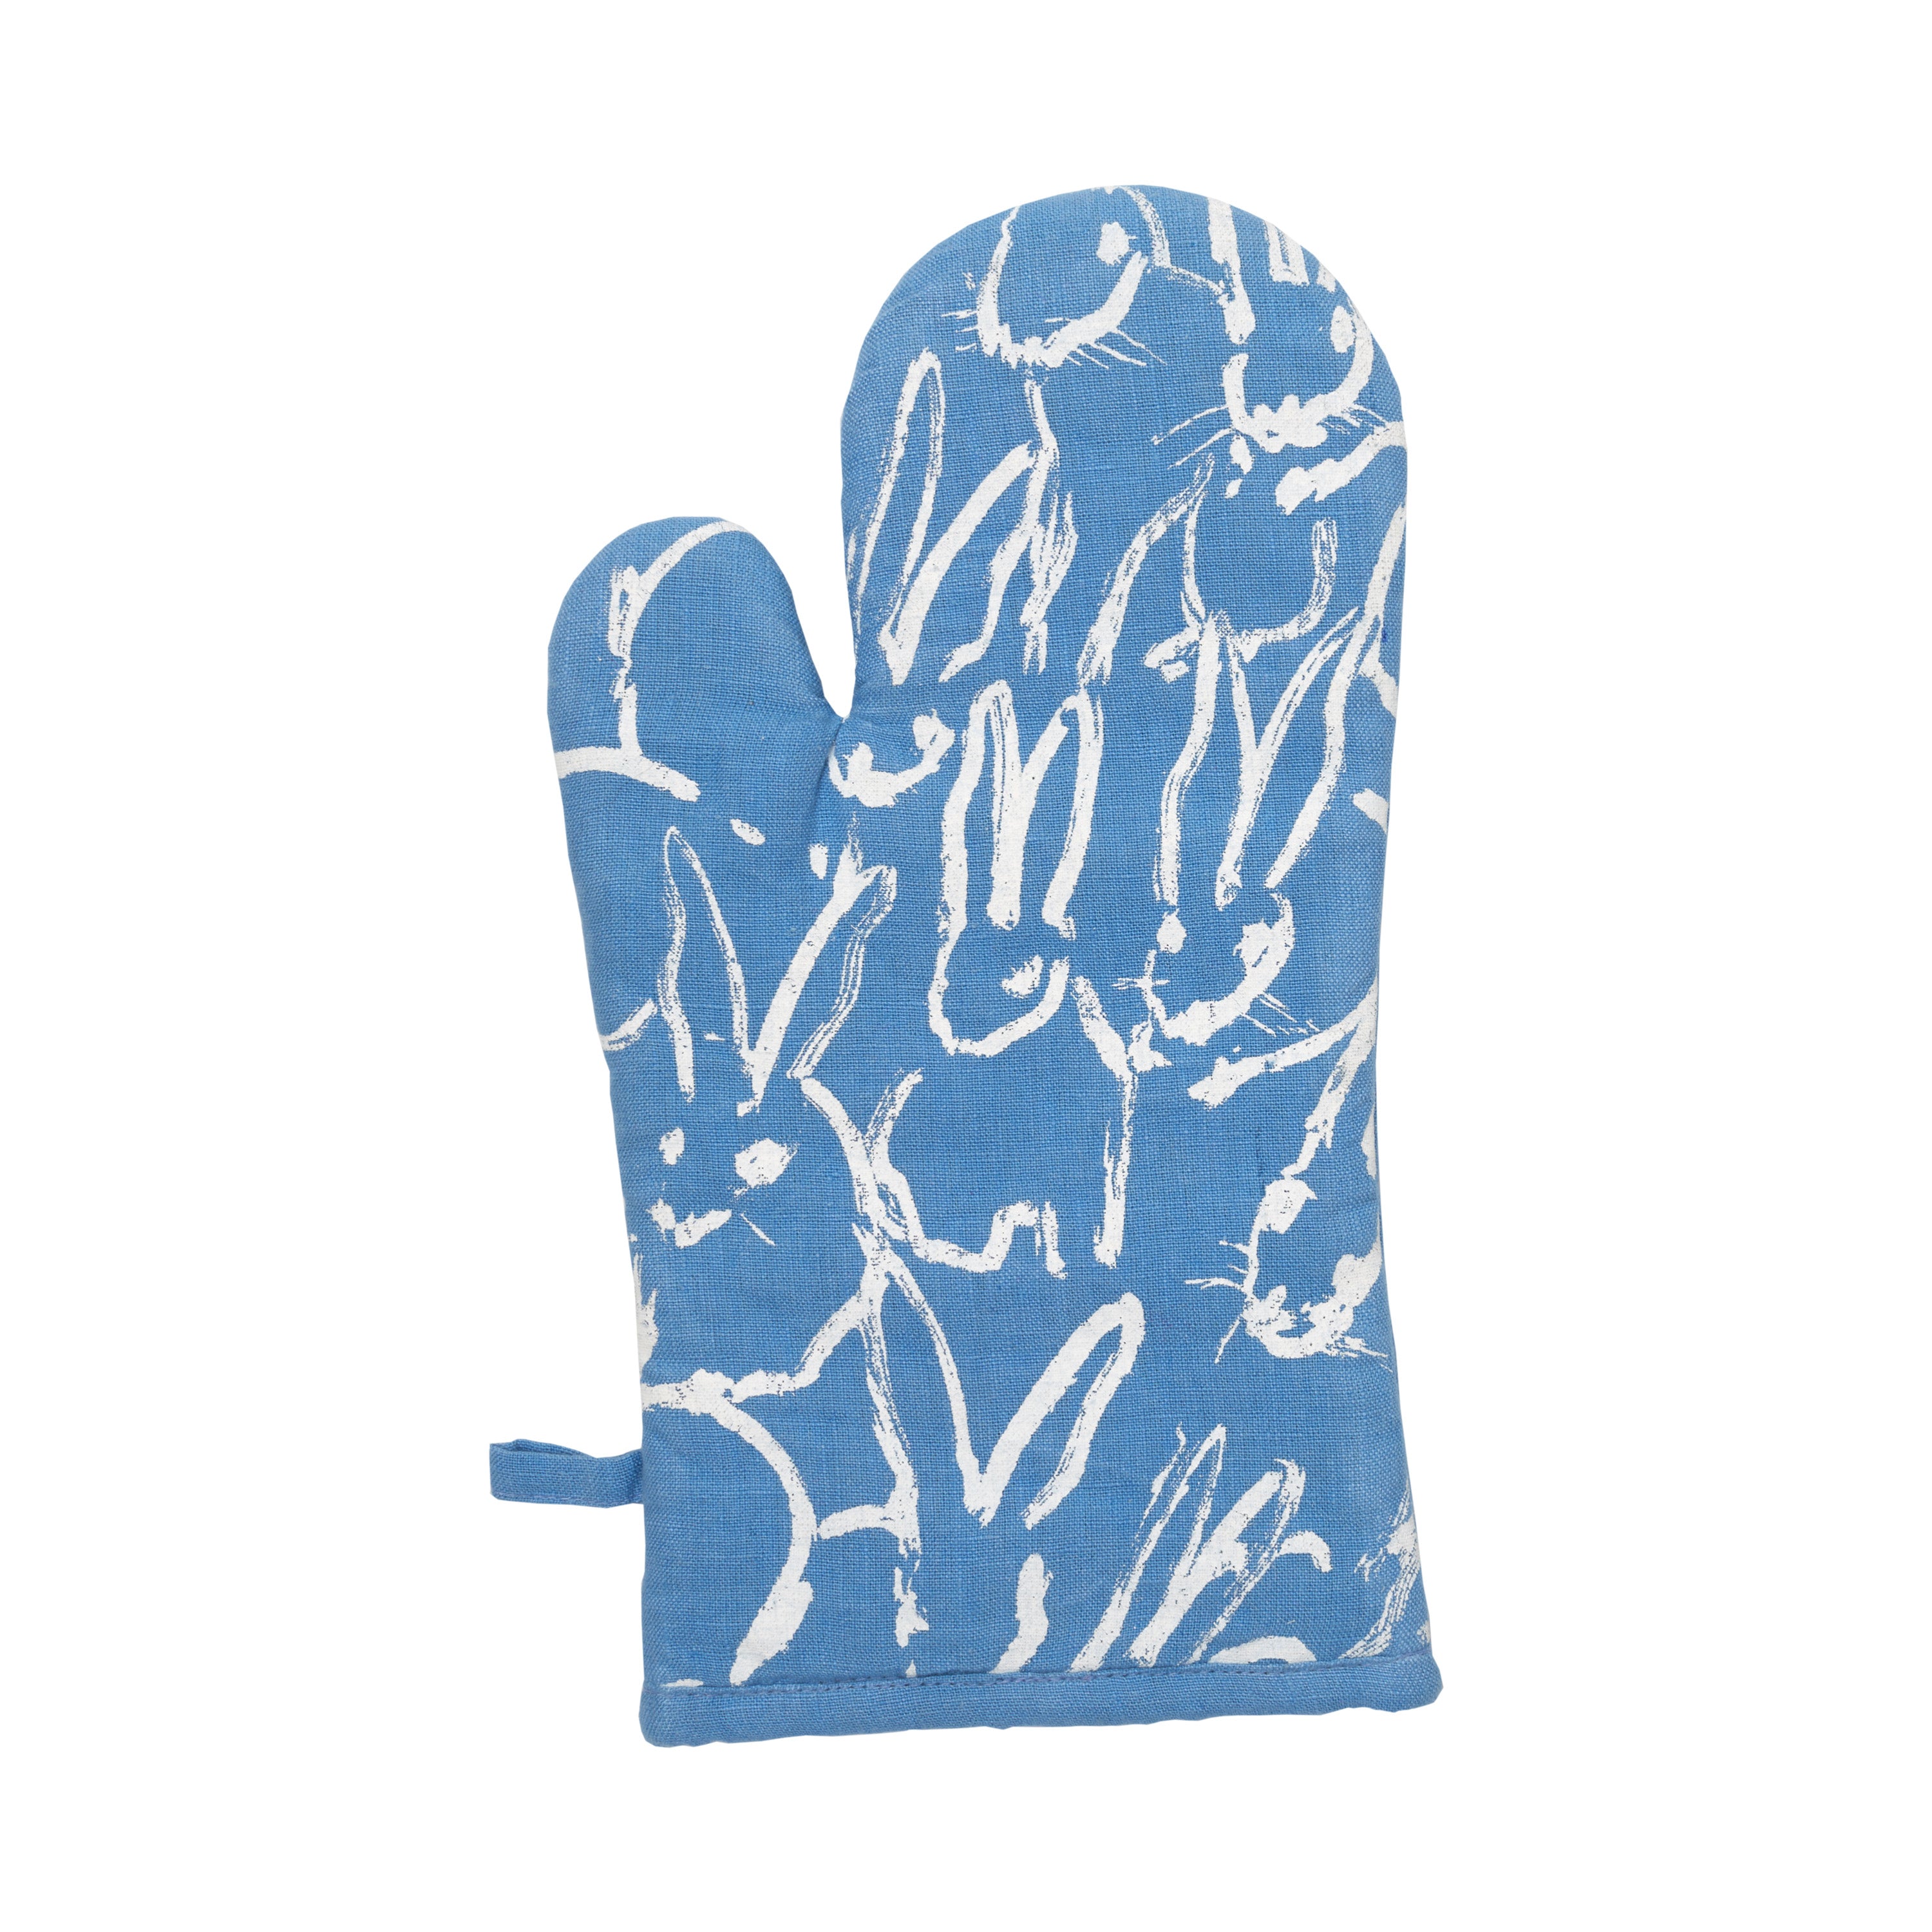 Fluffle Bunny Printed Linen Apron & Oven Mitt Set, French Blue